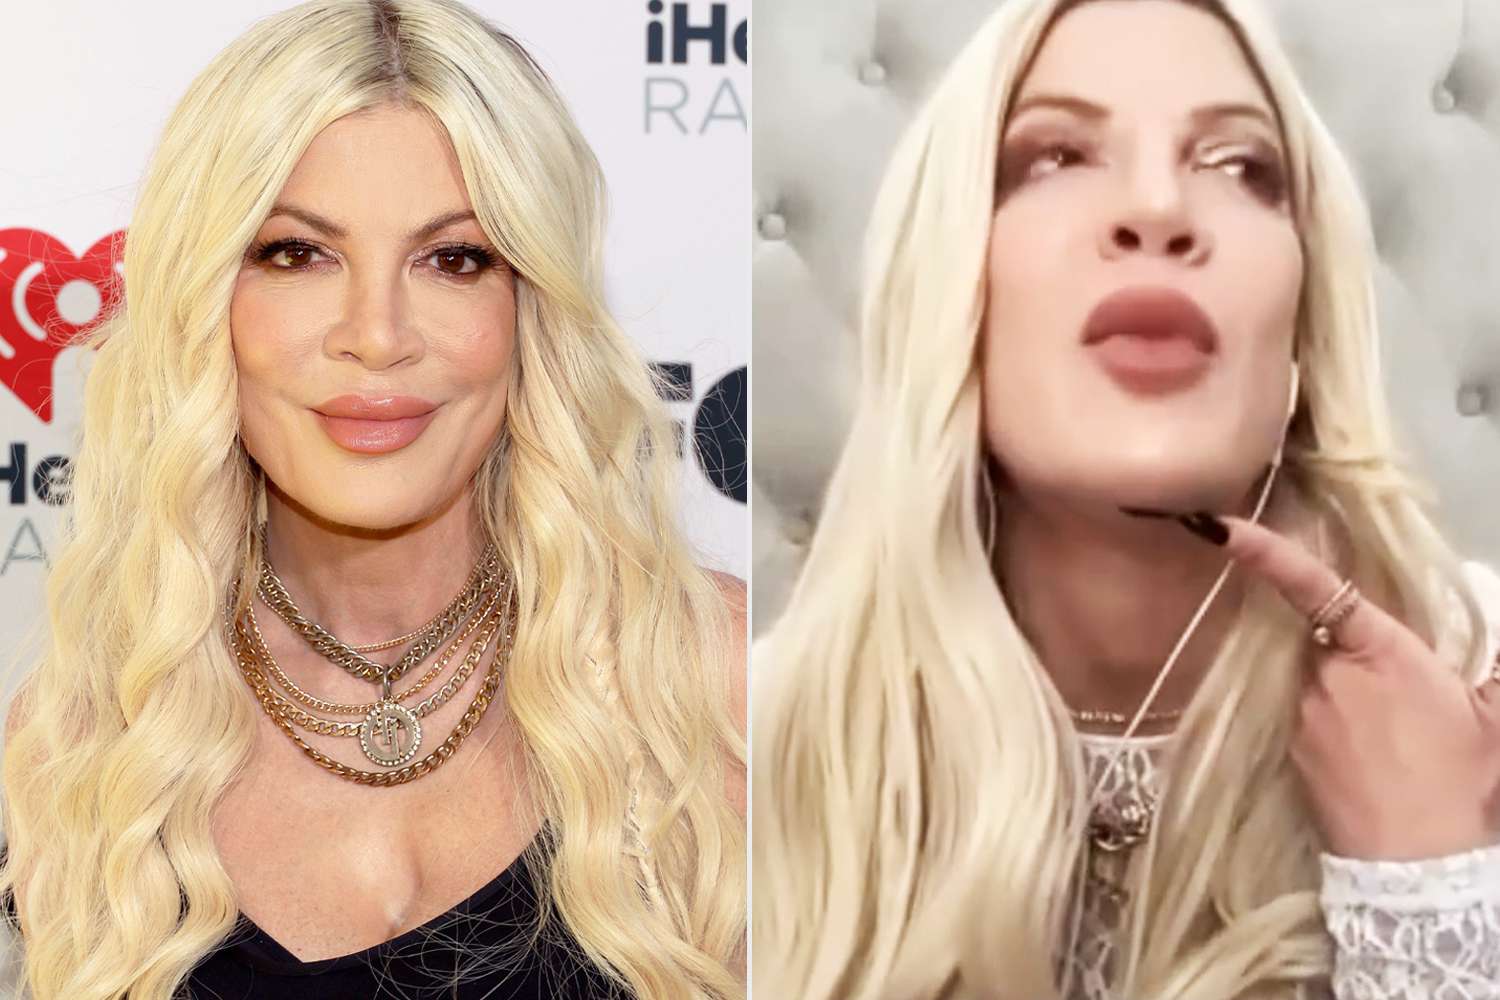 Tori Spelling Gets 6 Stitches on Her Chin after Fainting, Jokes She Should Have Asked Them to âMake It a Little Tighterâ